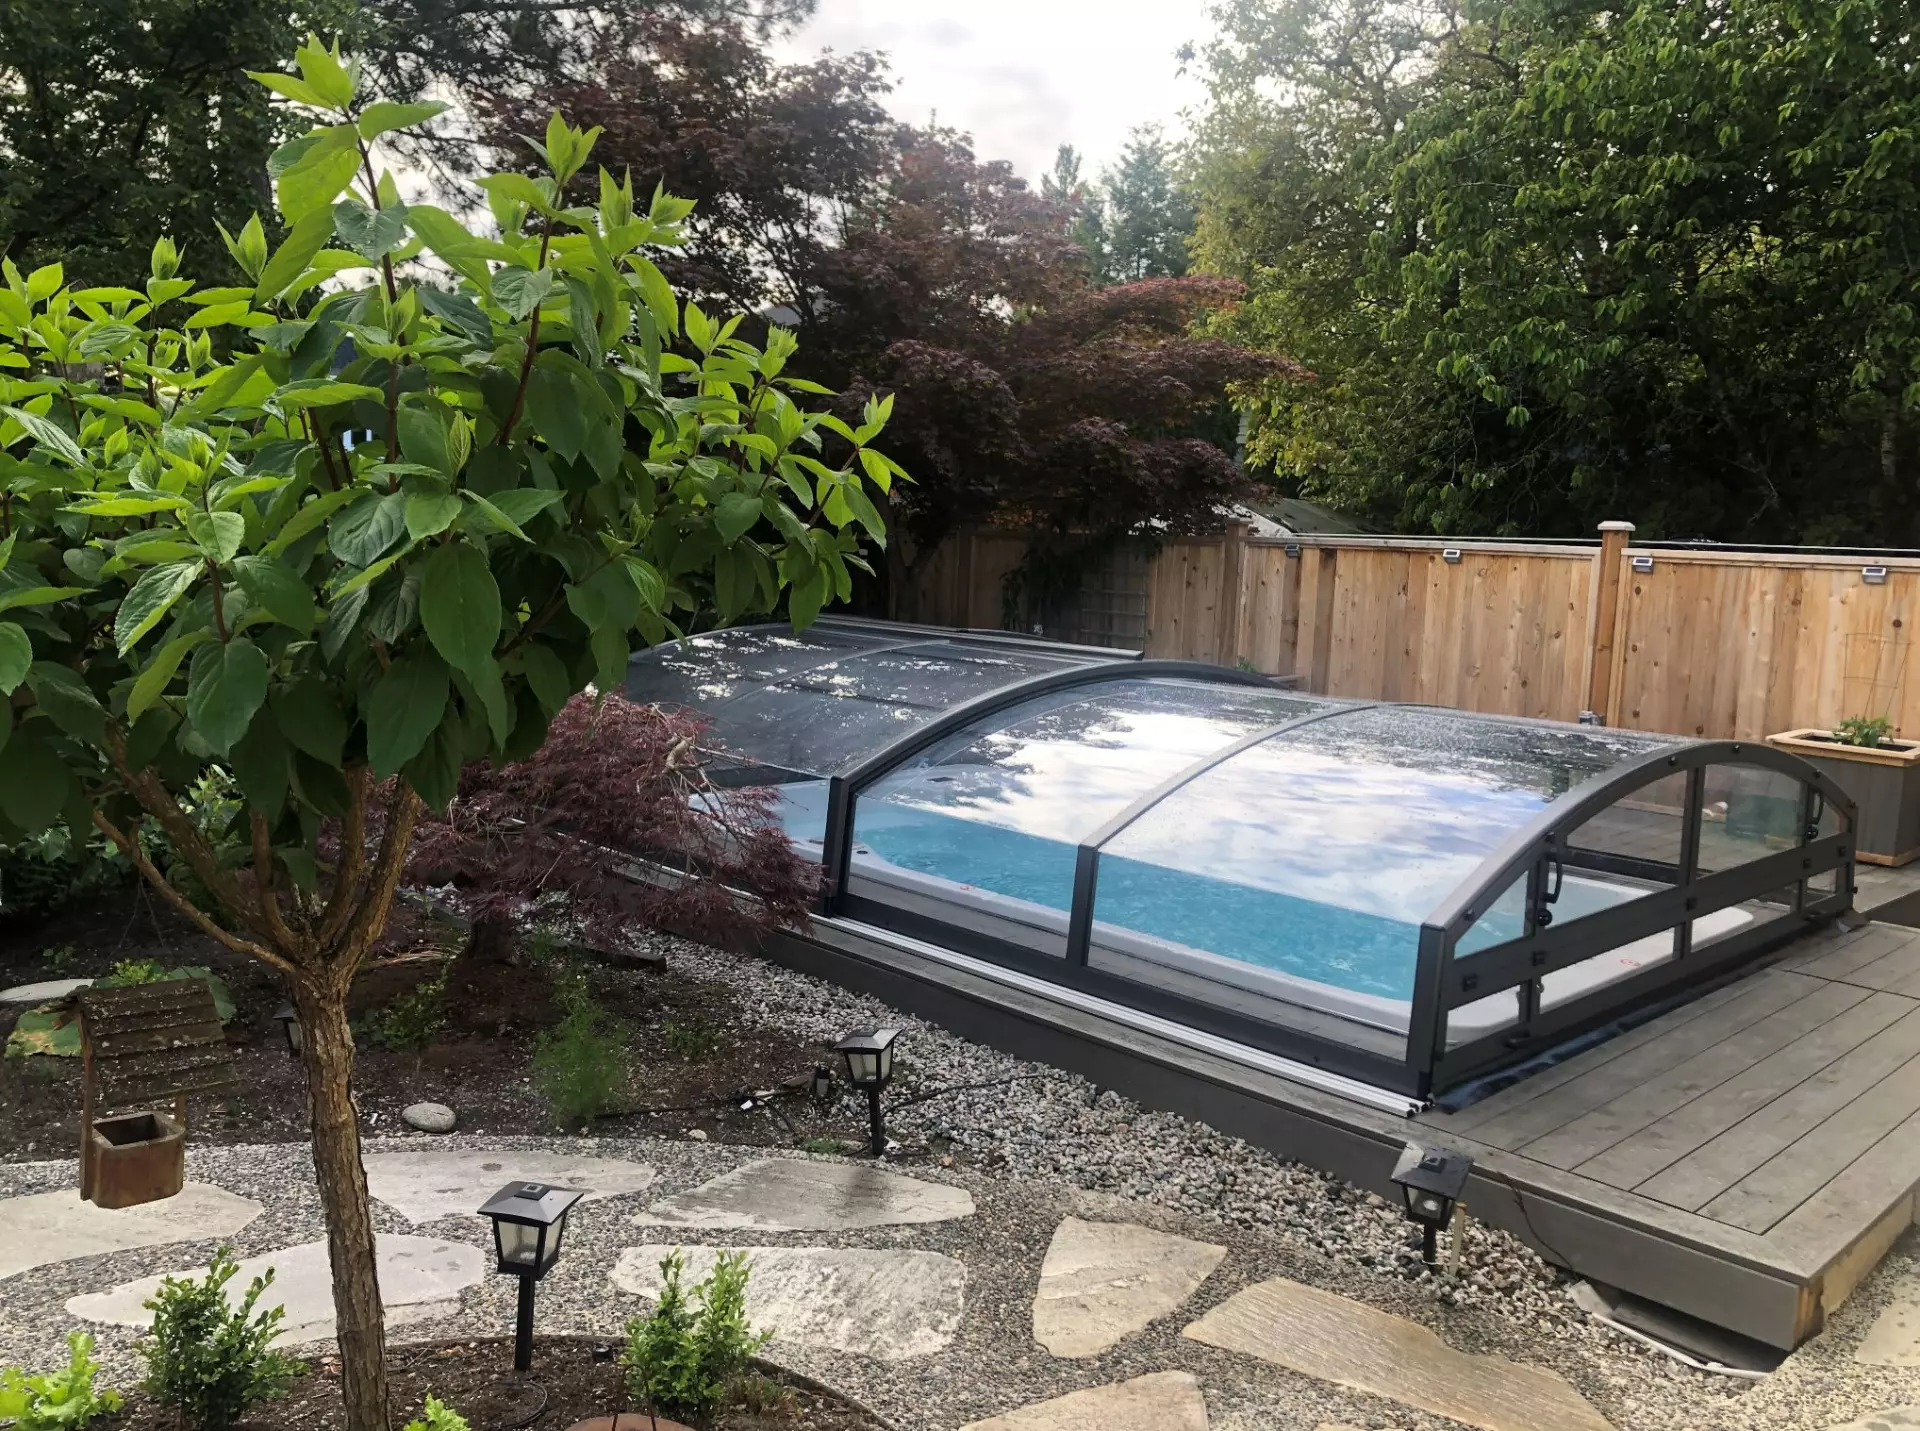 Retractable pool cover protecting outdoor pool from leaves and debris